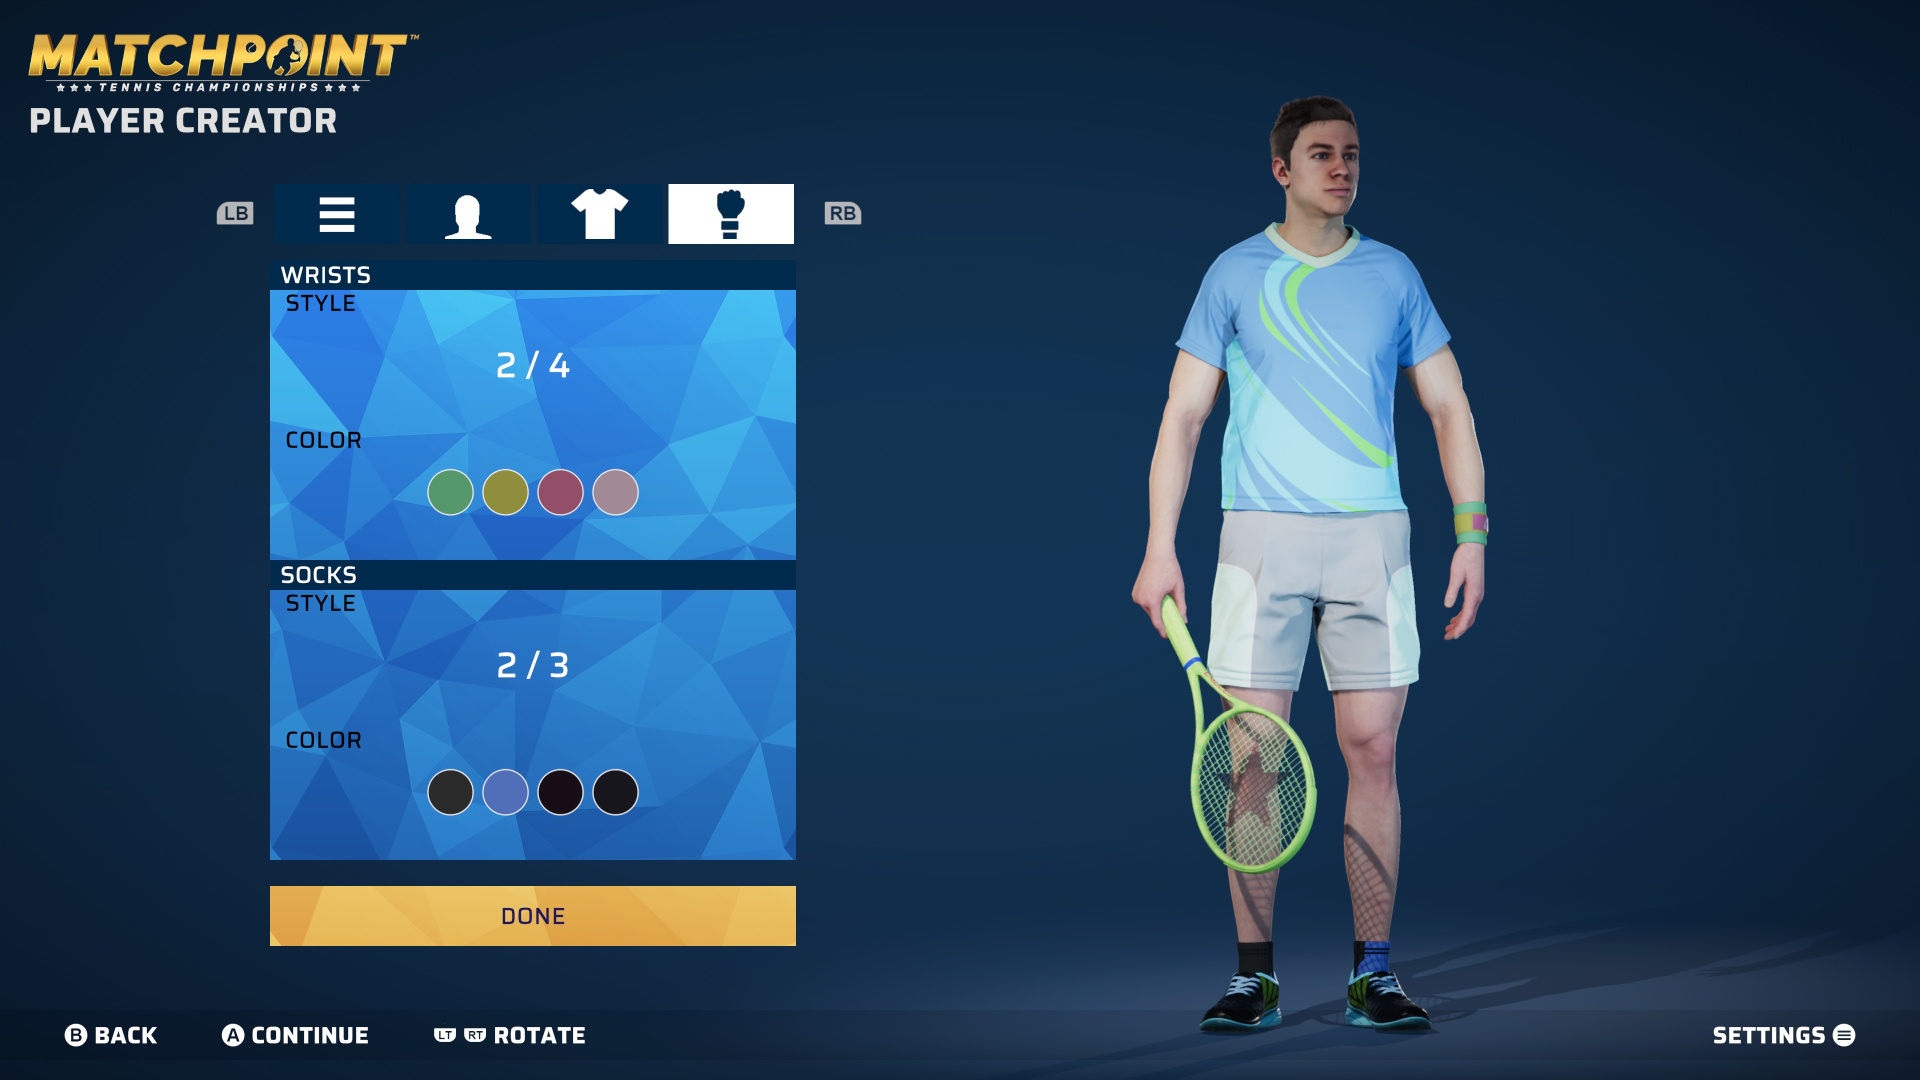 Matchpoint Tennis Championships (2022) Xbox Series XS Game Pure Xbox